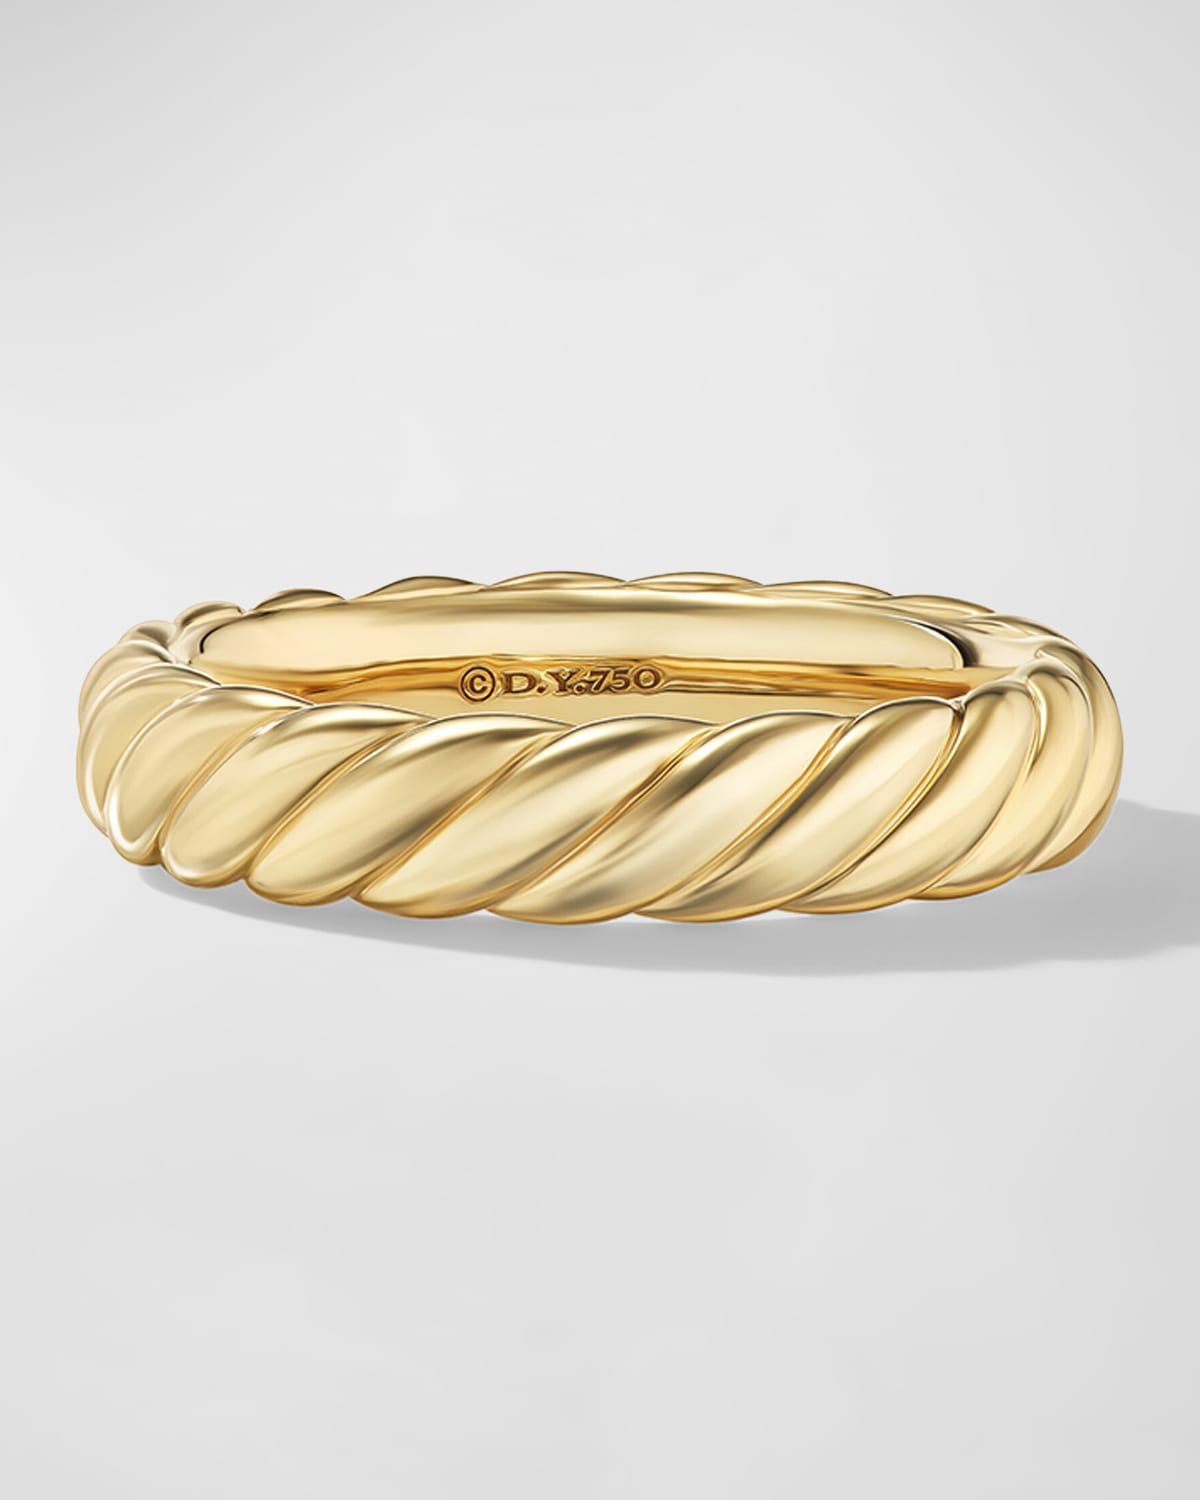 David Yurman Sculpted Cable Band Ring in 18K Gold, 4.5mm, Size 9